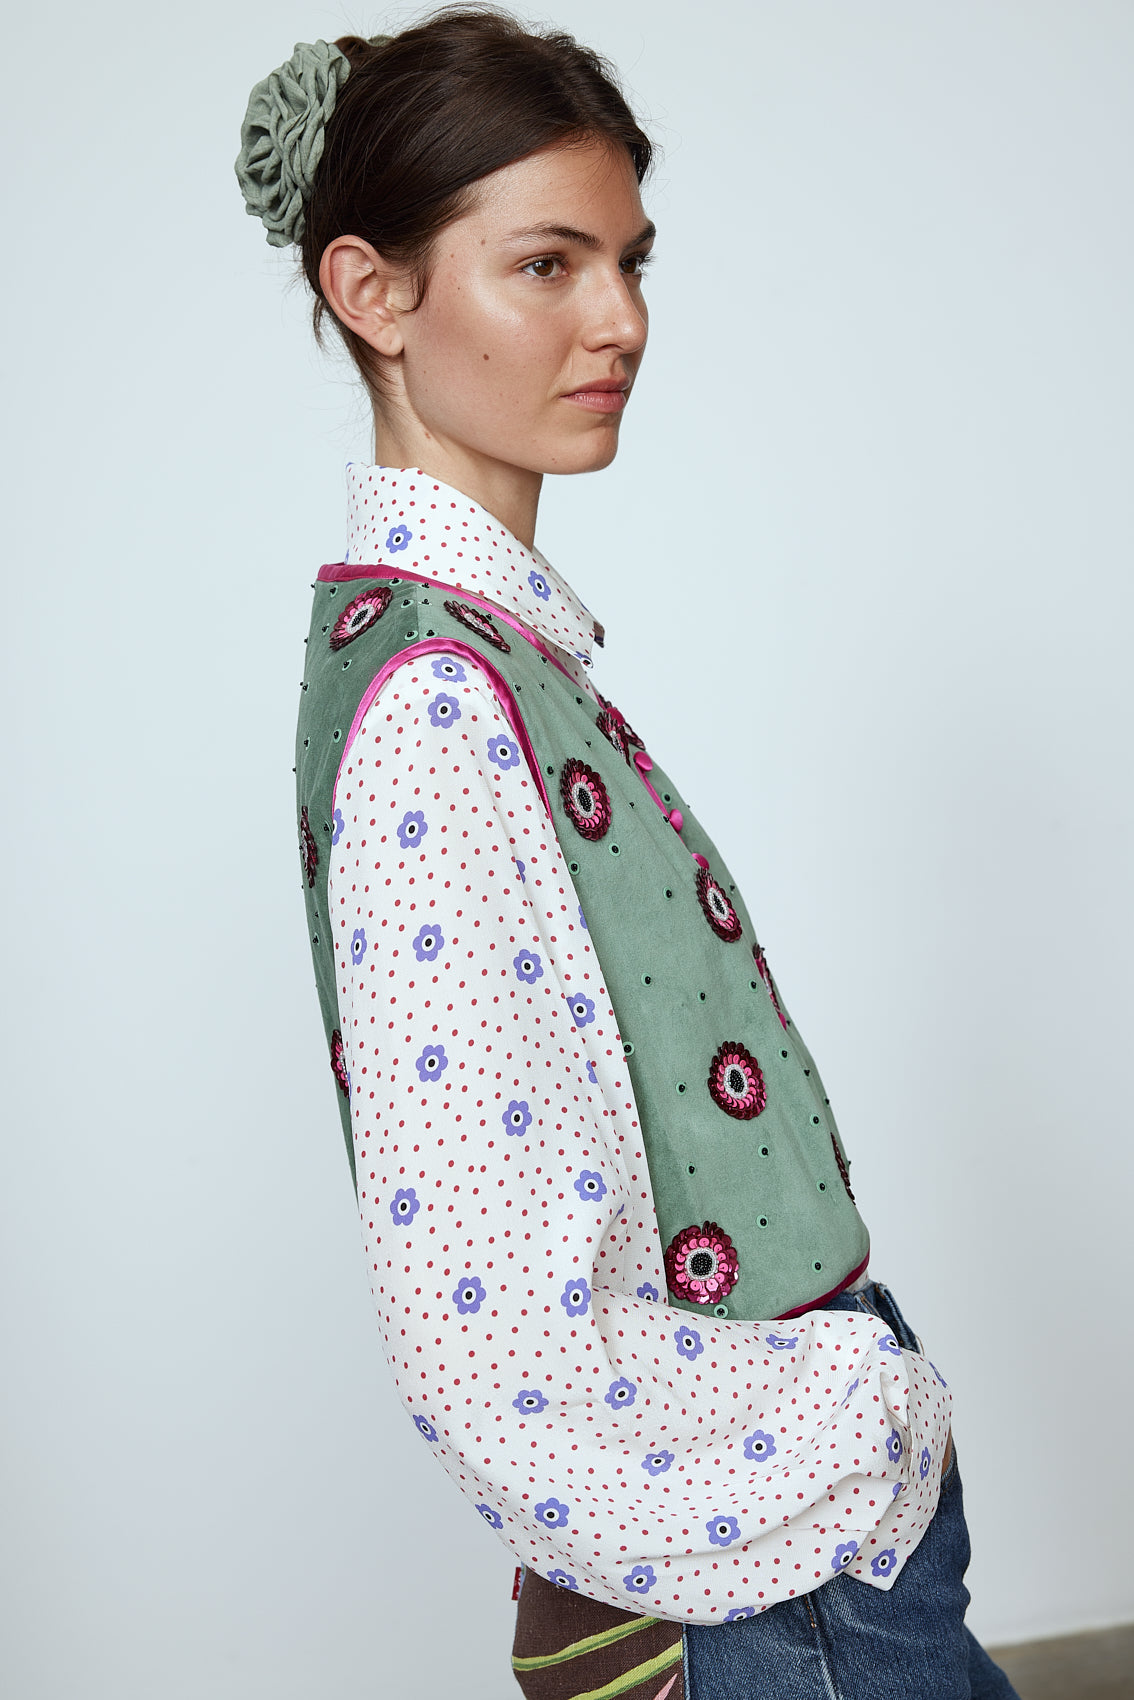 The Ravnbak Vest in Olive Green velvet with a pink lining. The vest is exquisitely hand-embroidered by skilled artisans in our flower daisy pattern using beadings and sequins. Style it over a shirt, dress, or top.  Also available in Baby Pink.